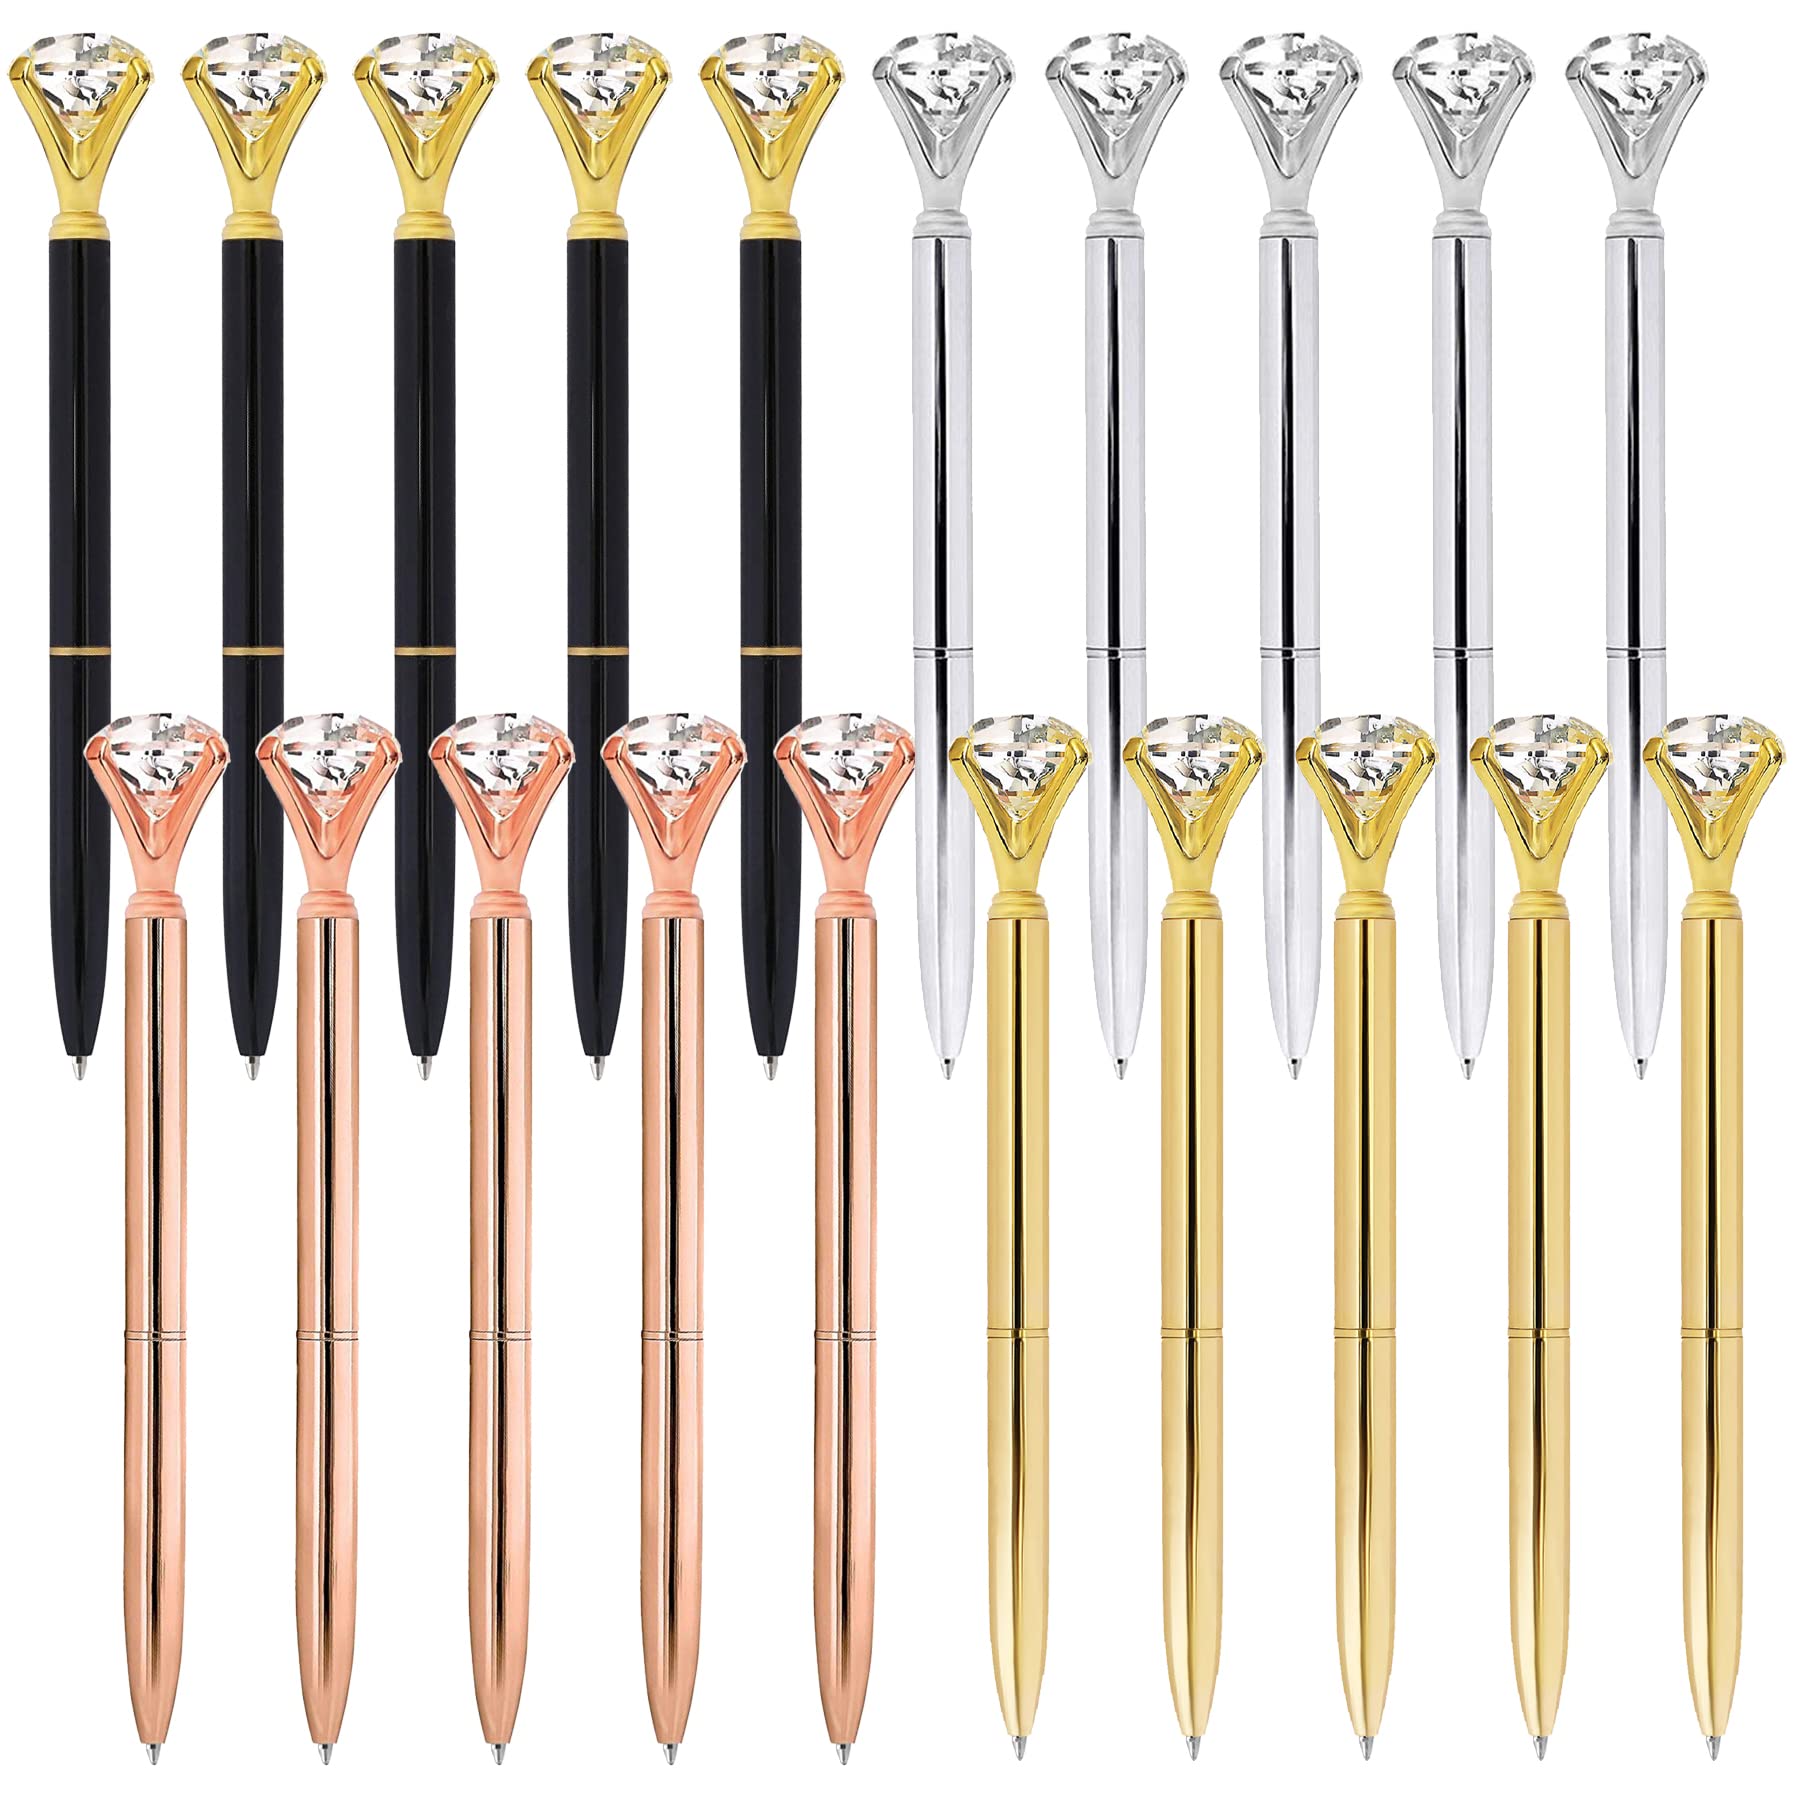 ETCBUYS Multi-Color Diamond Ballpoint Pen for Stylish Fancy Office Supplies- 20-Pack-Black-Silver-Rose-Gold